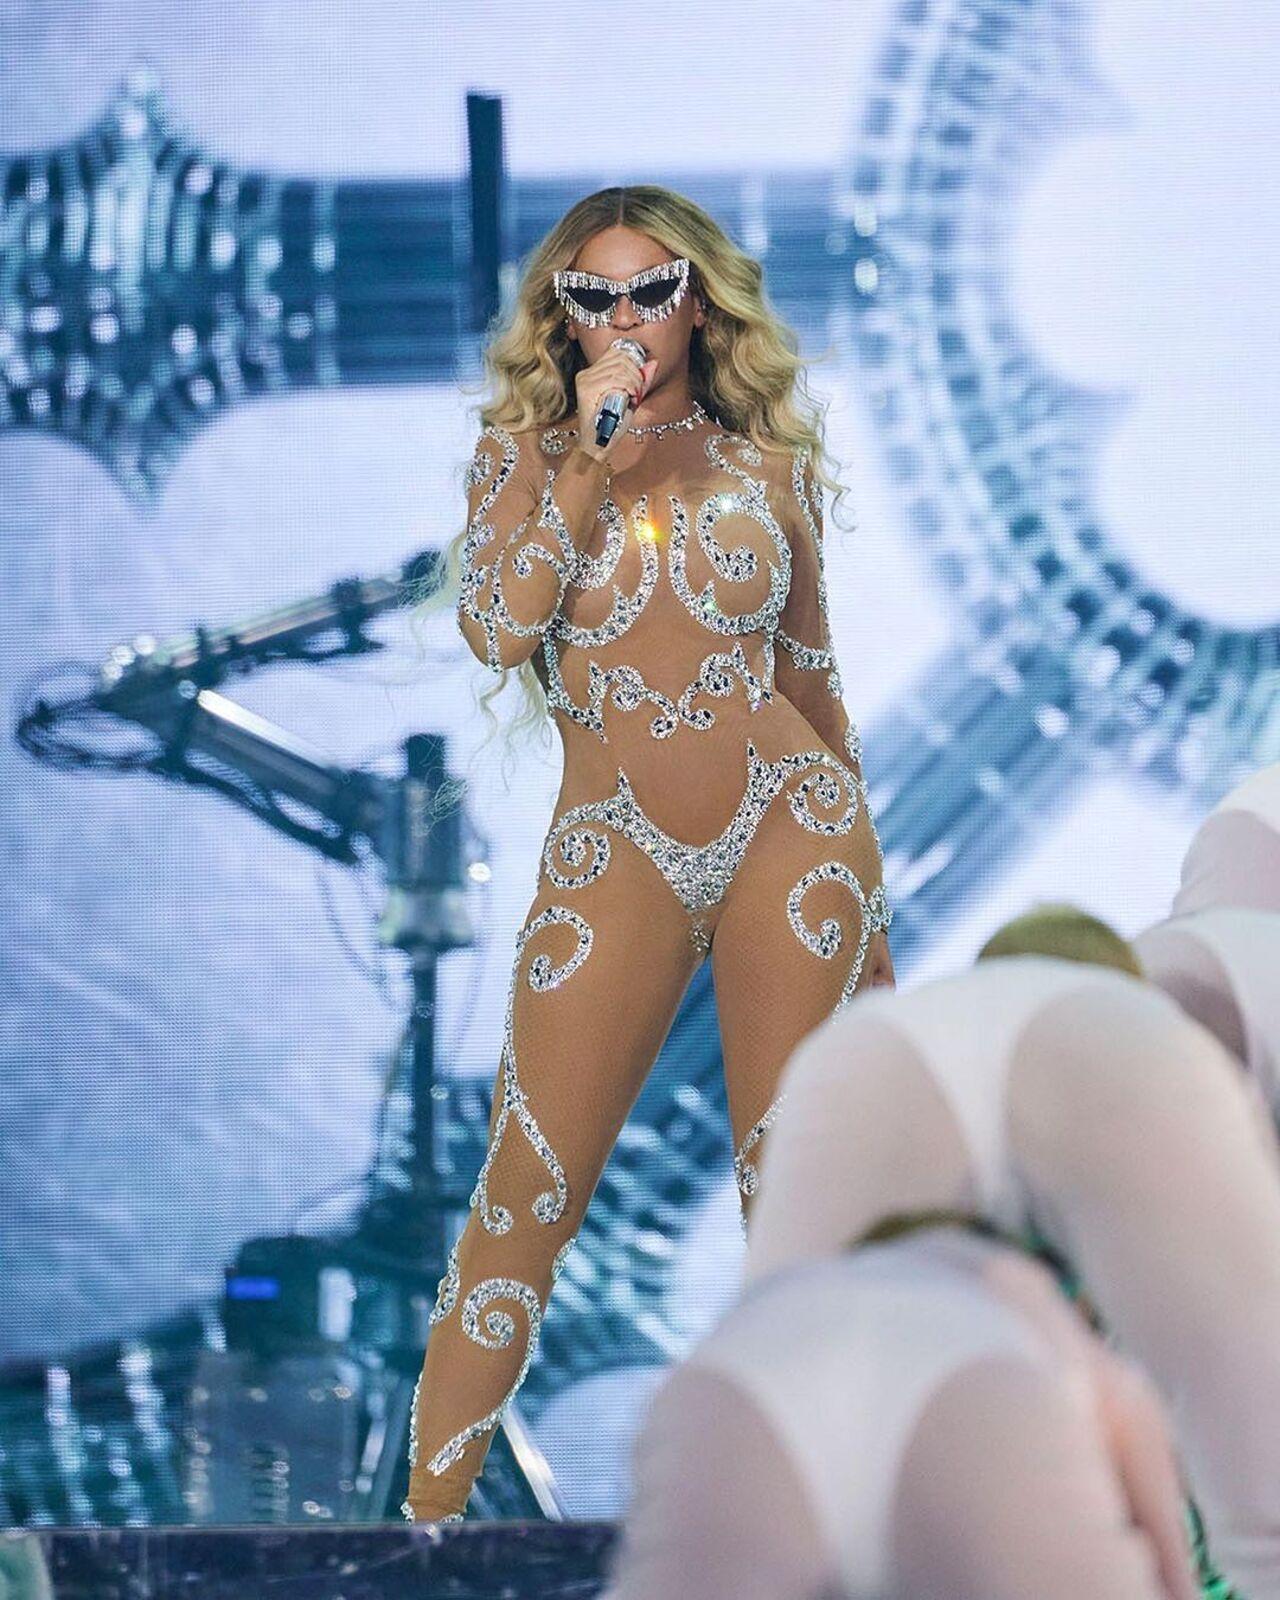 Beyonce is known for her bold fashion choices and flaunted a risque look with this skin-coloured full-body mesh outfit that matched her complexion